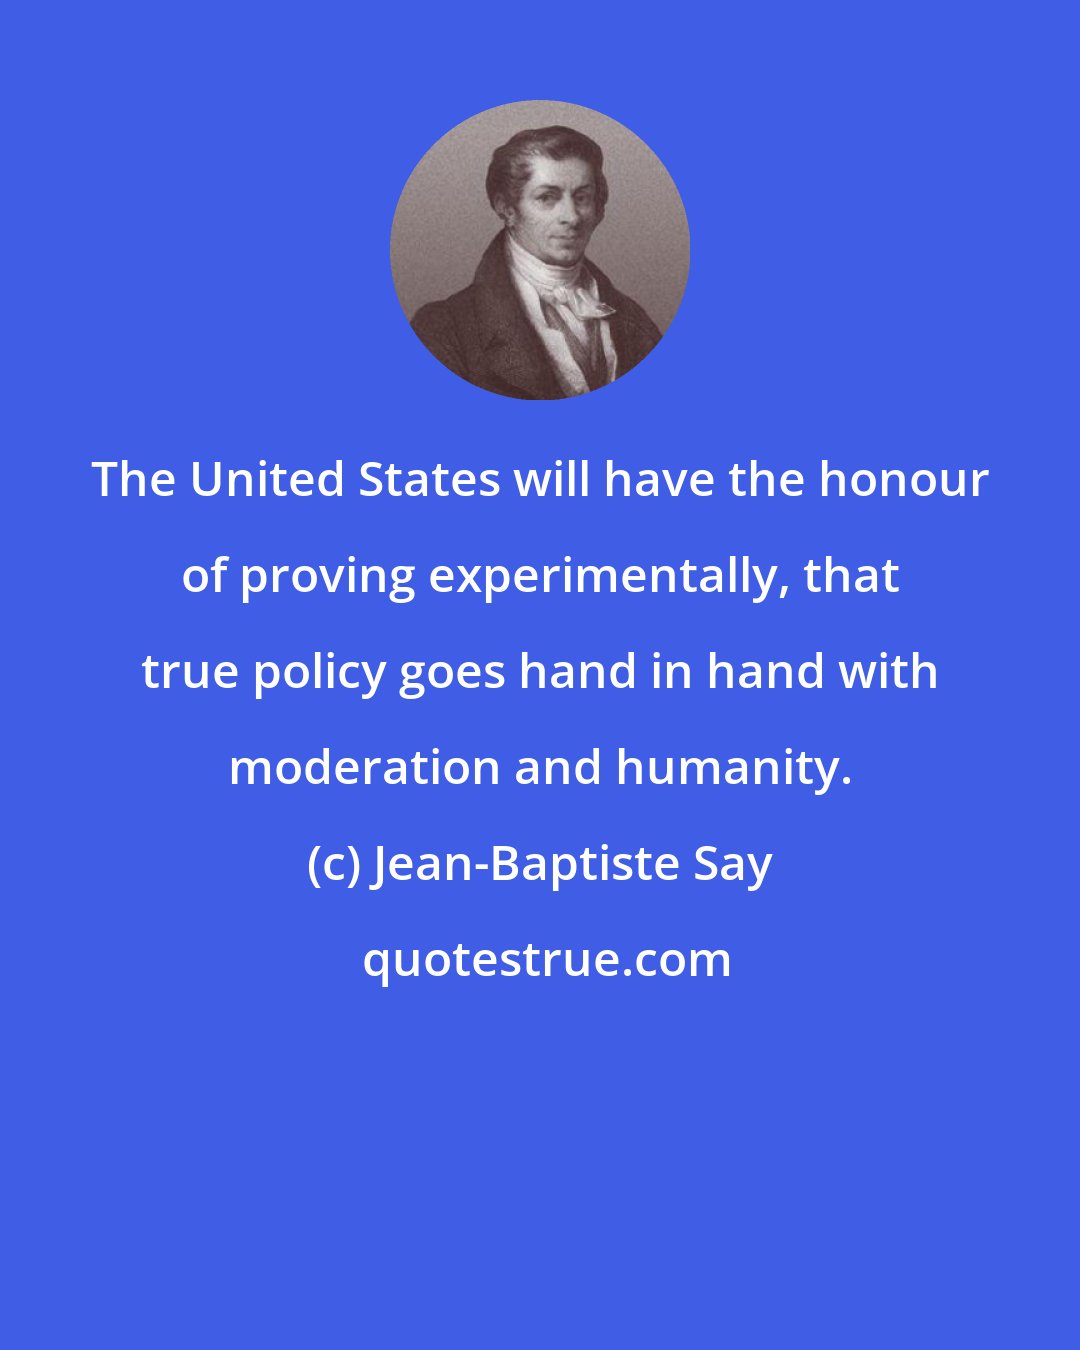 Jean-Baptiste Say: The United States will have the honour of proving experimentally, that true policy goes hand in hand with moderation and humanity.